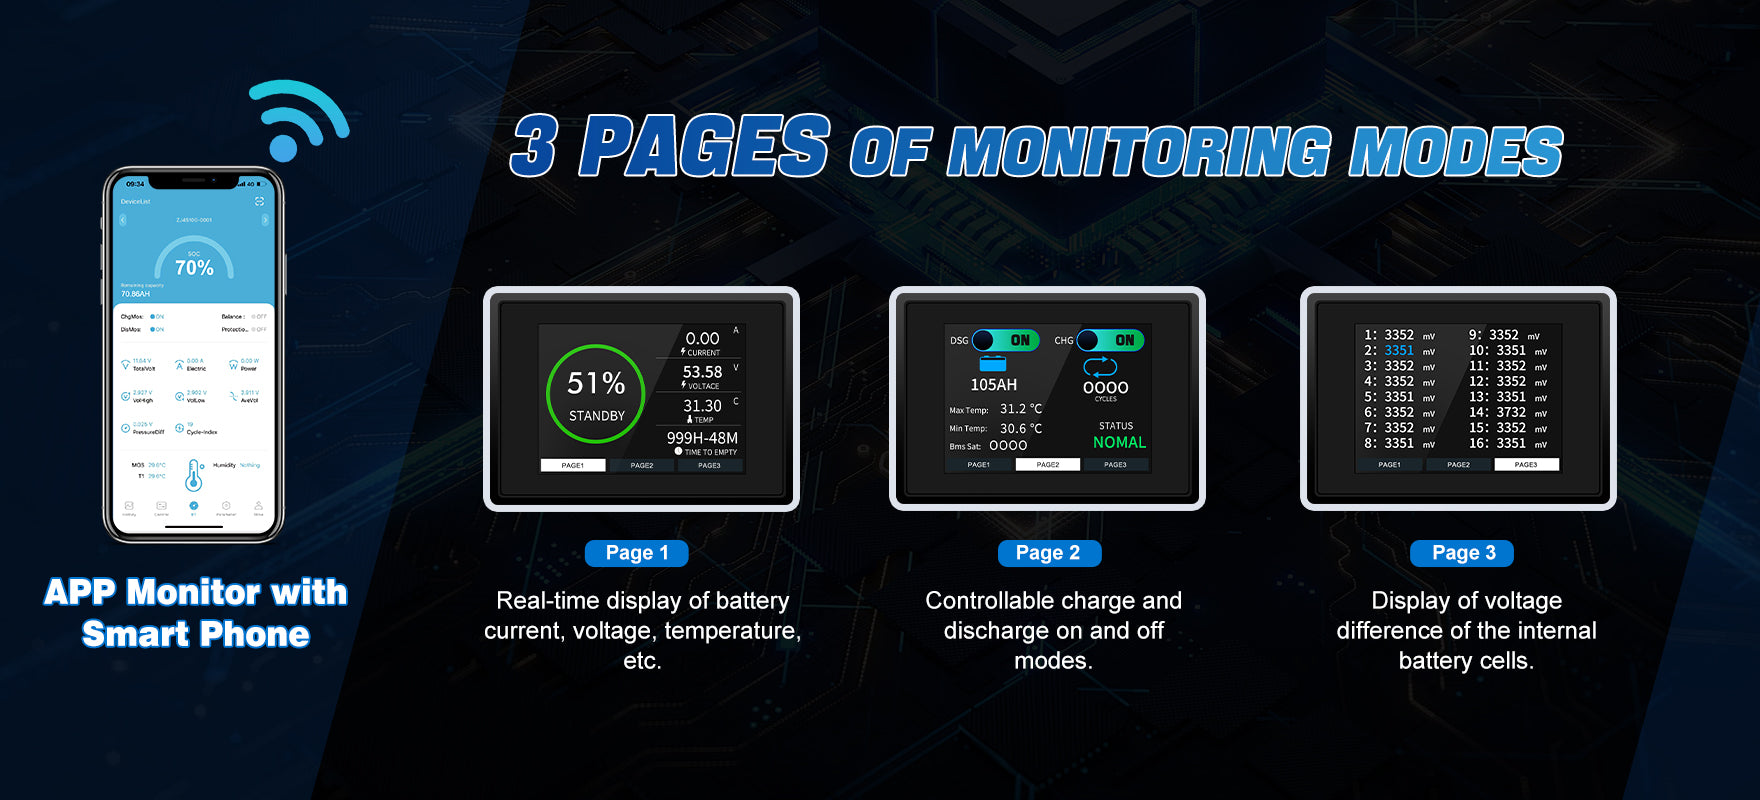 3 Pages Of Monitoring Modes